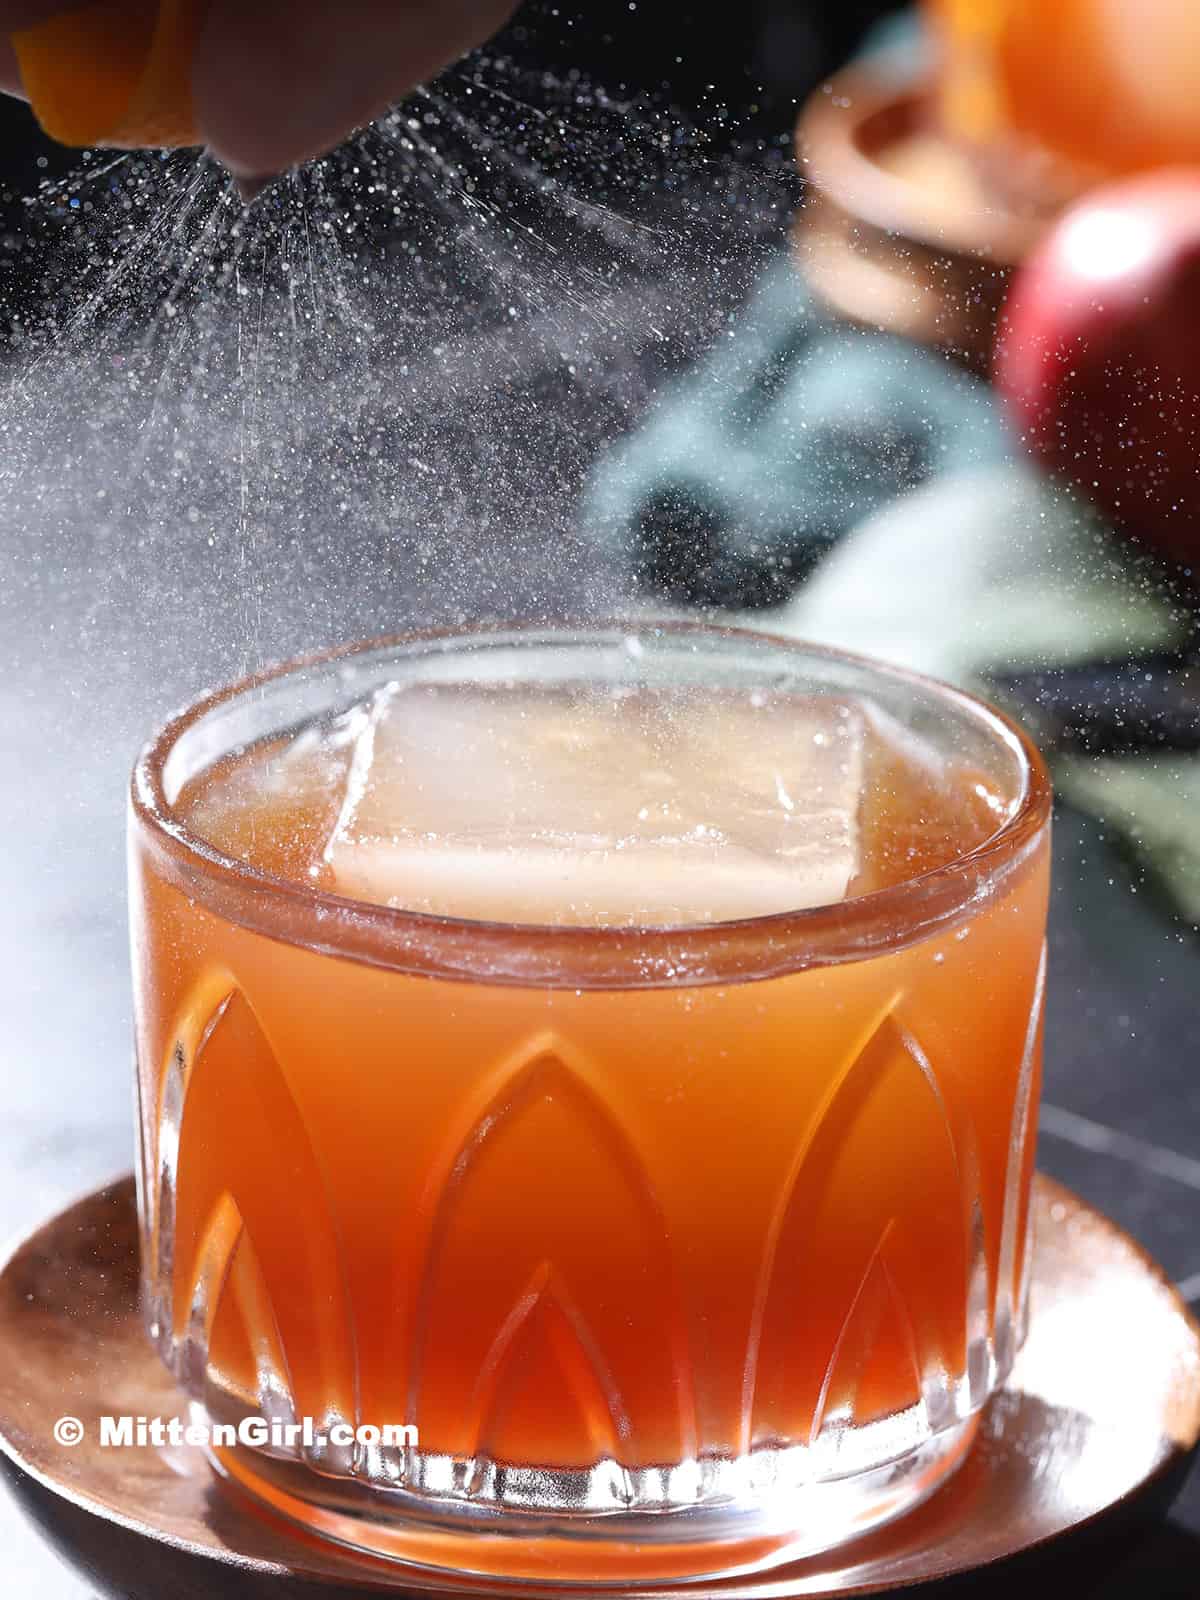 An orange peel being expressed over a cocktail.